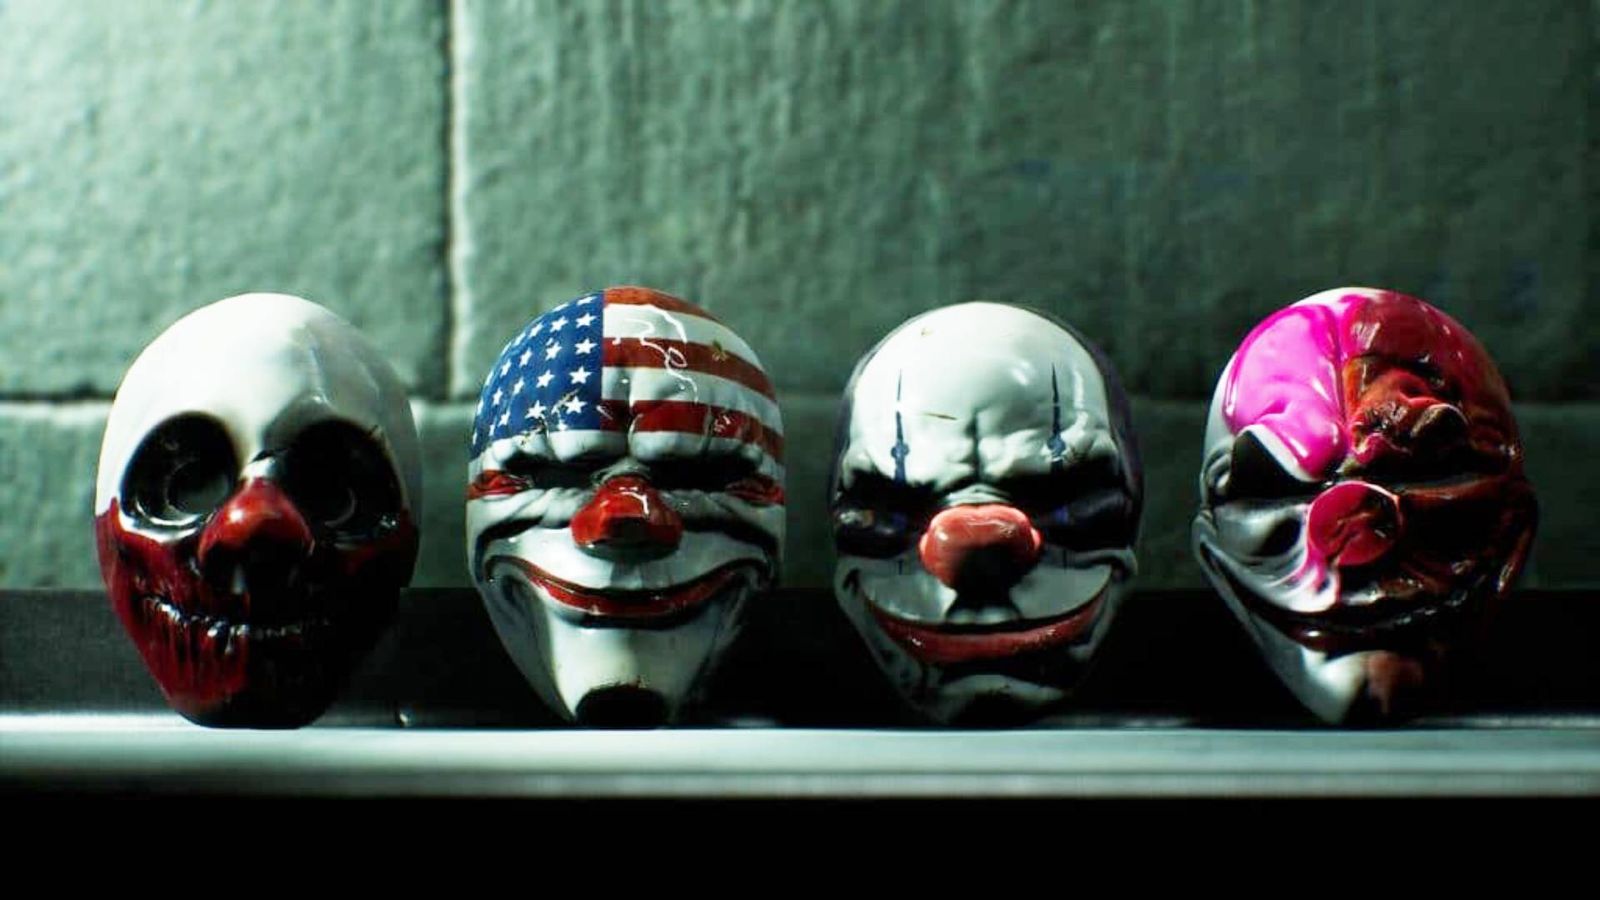 Does Payday 3 beta progress carry over - An image of the 4 masks from Payday 3